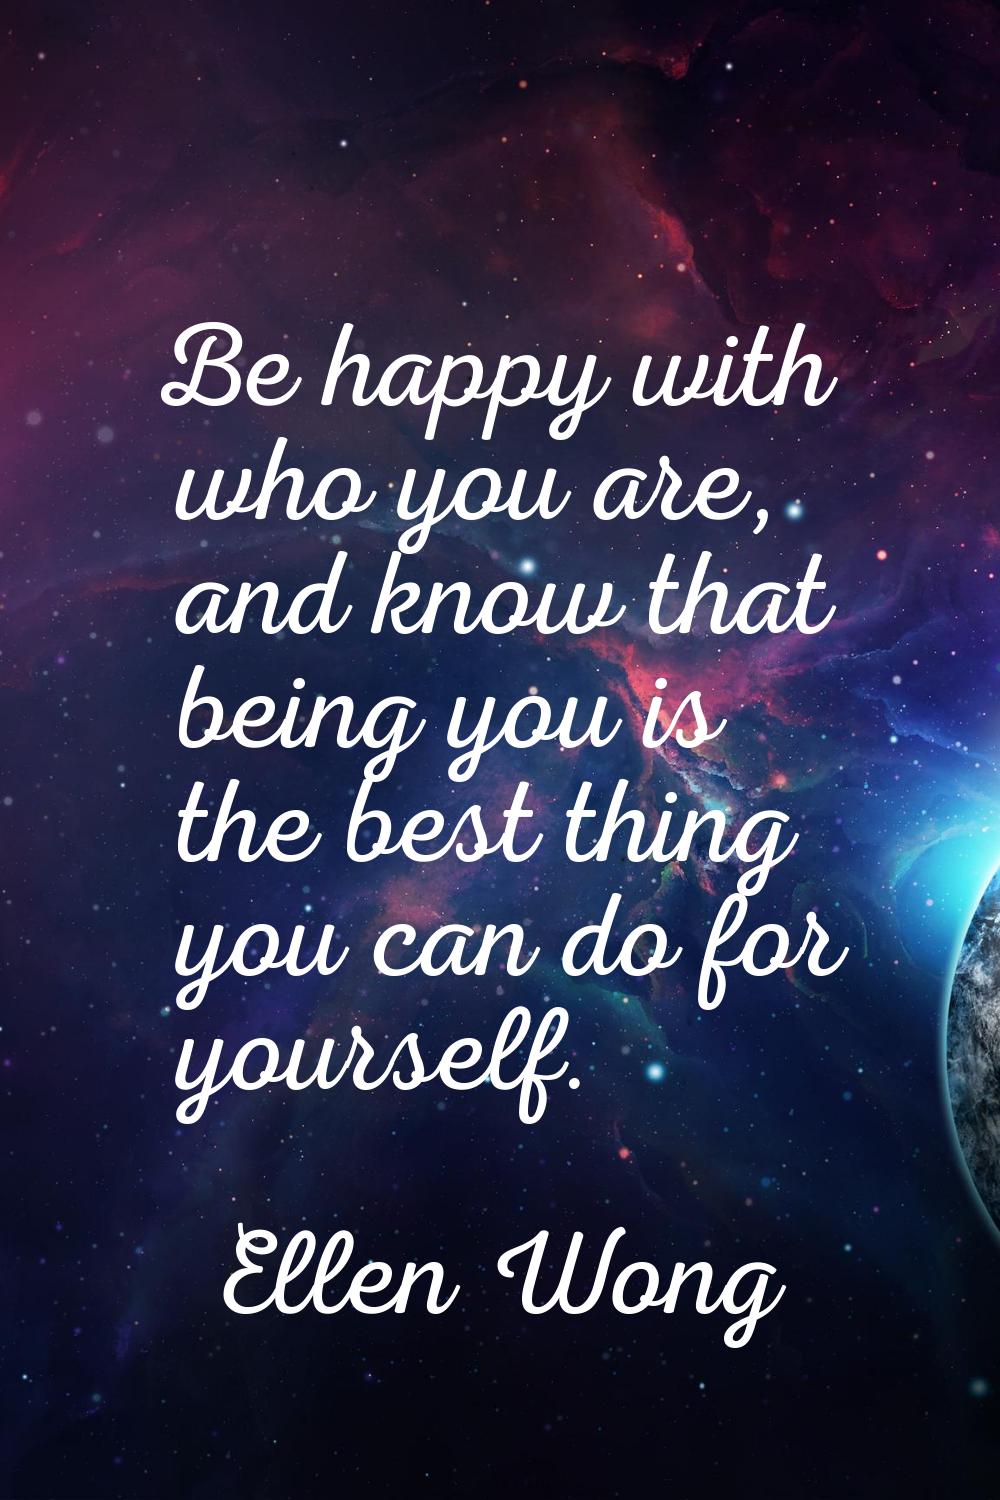 Be happy with who you are, and know that being you is the best thing you can do for yourself.